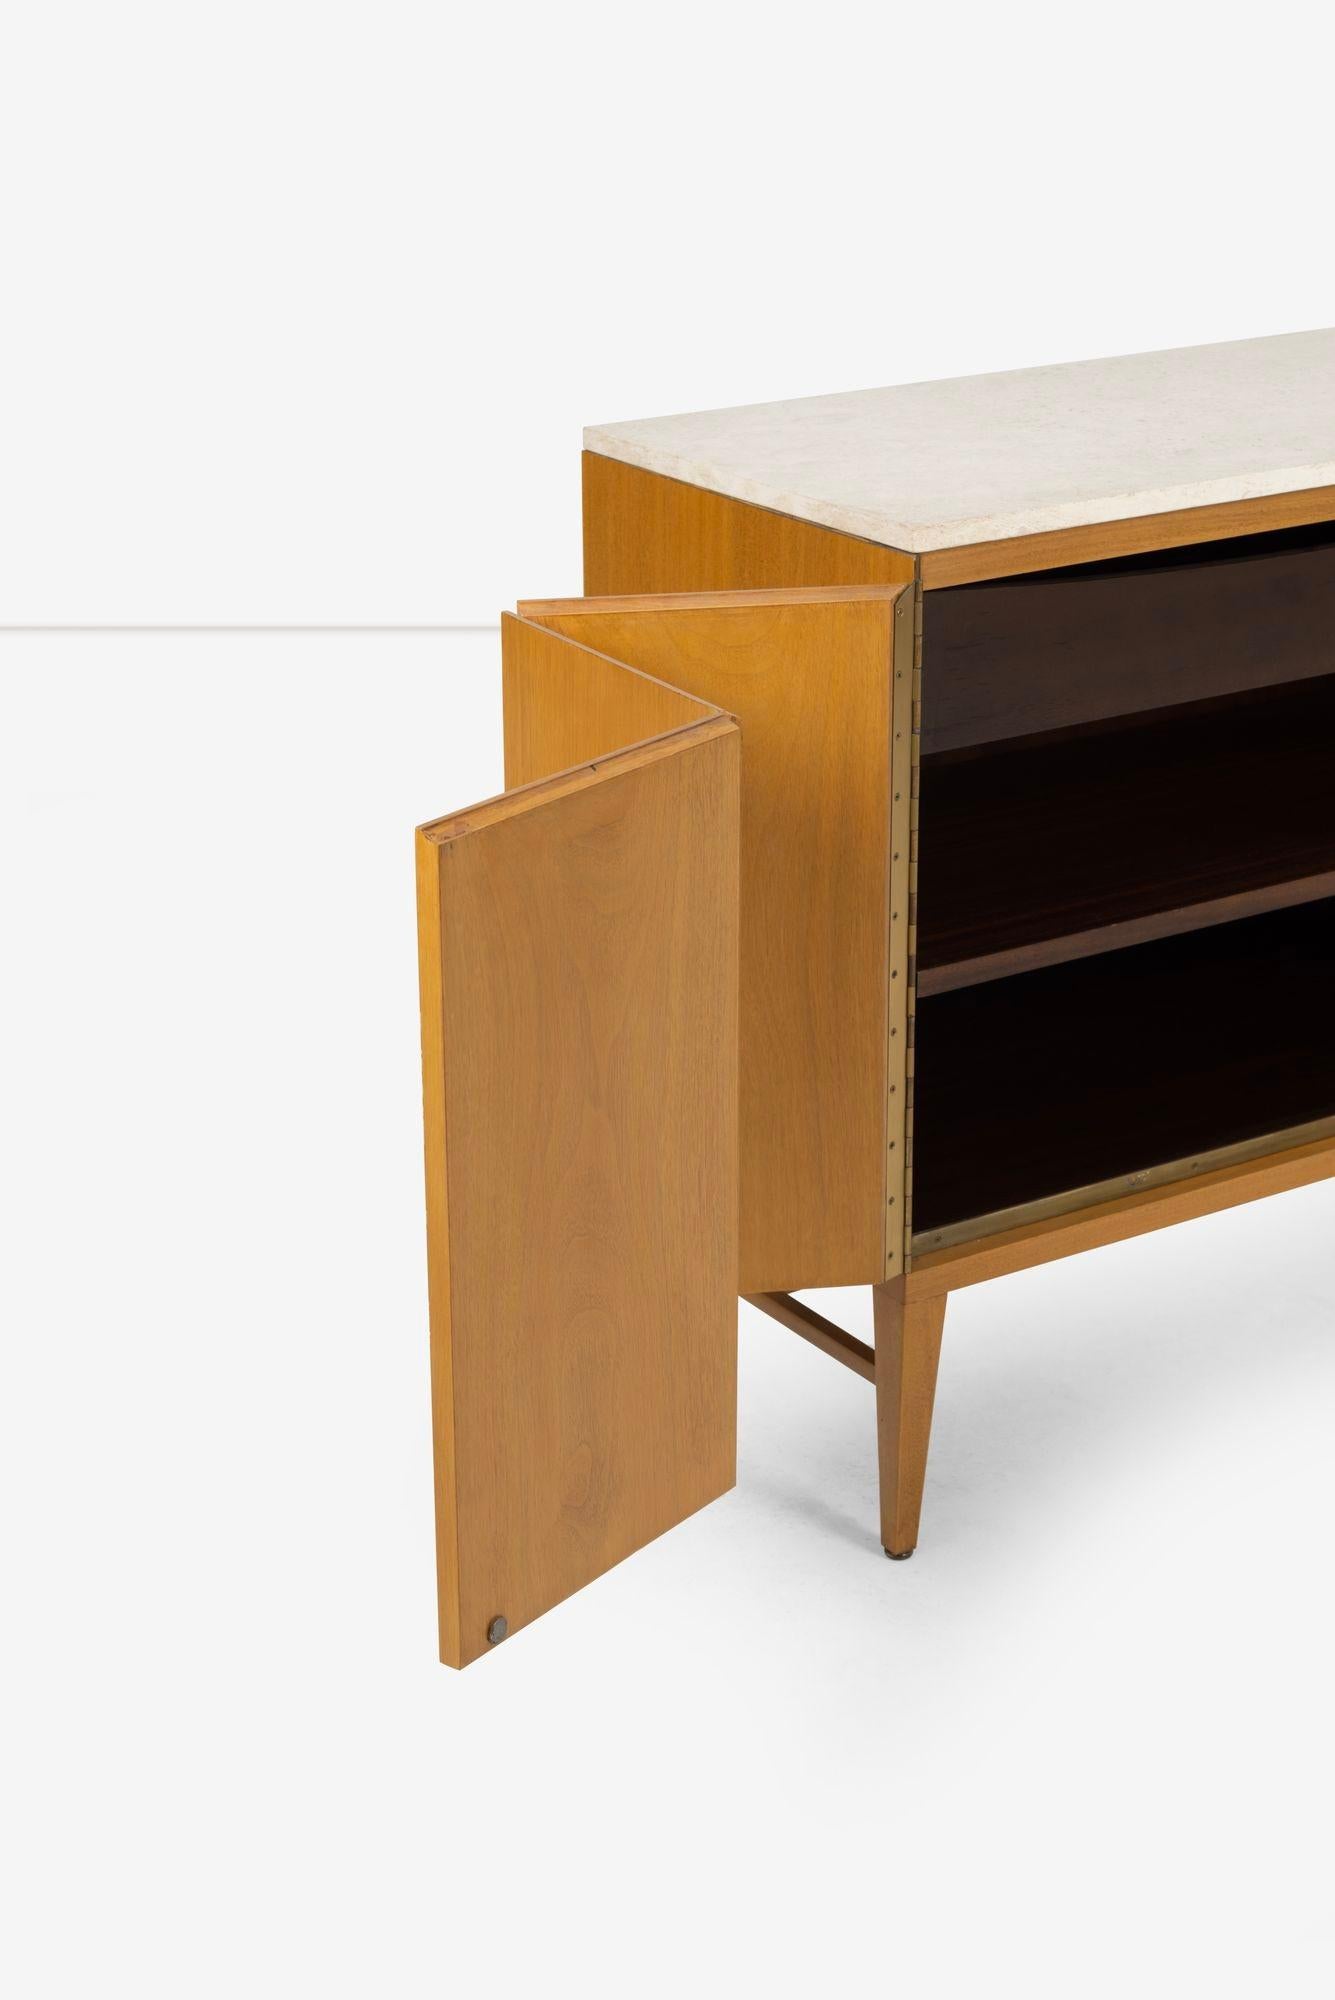 Paul McCobb Sideboard for Calvin In Good Condition For Sale In Chicago, IL